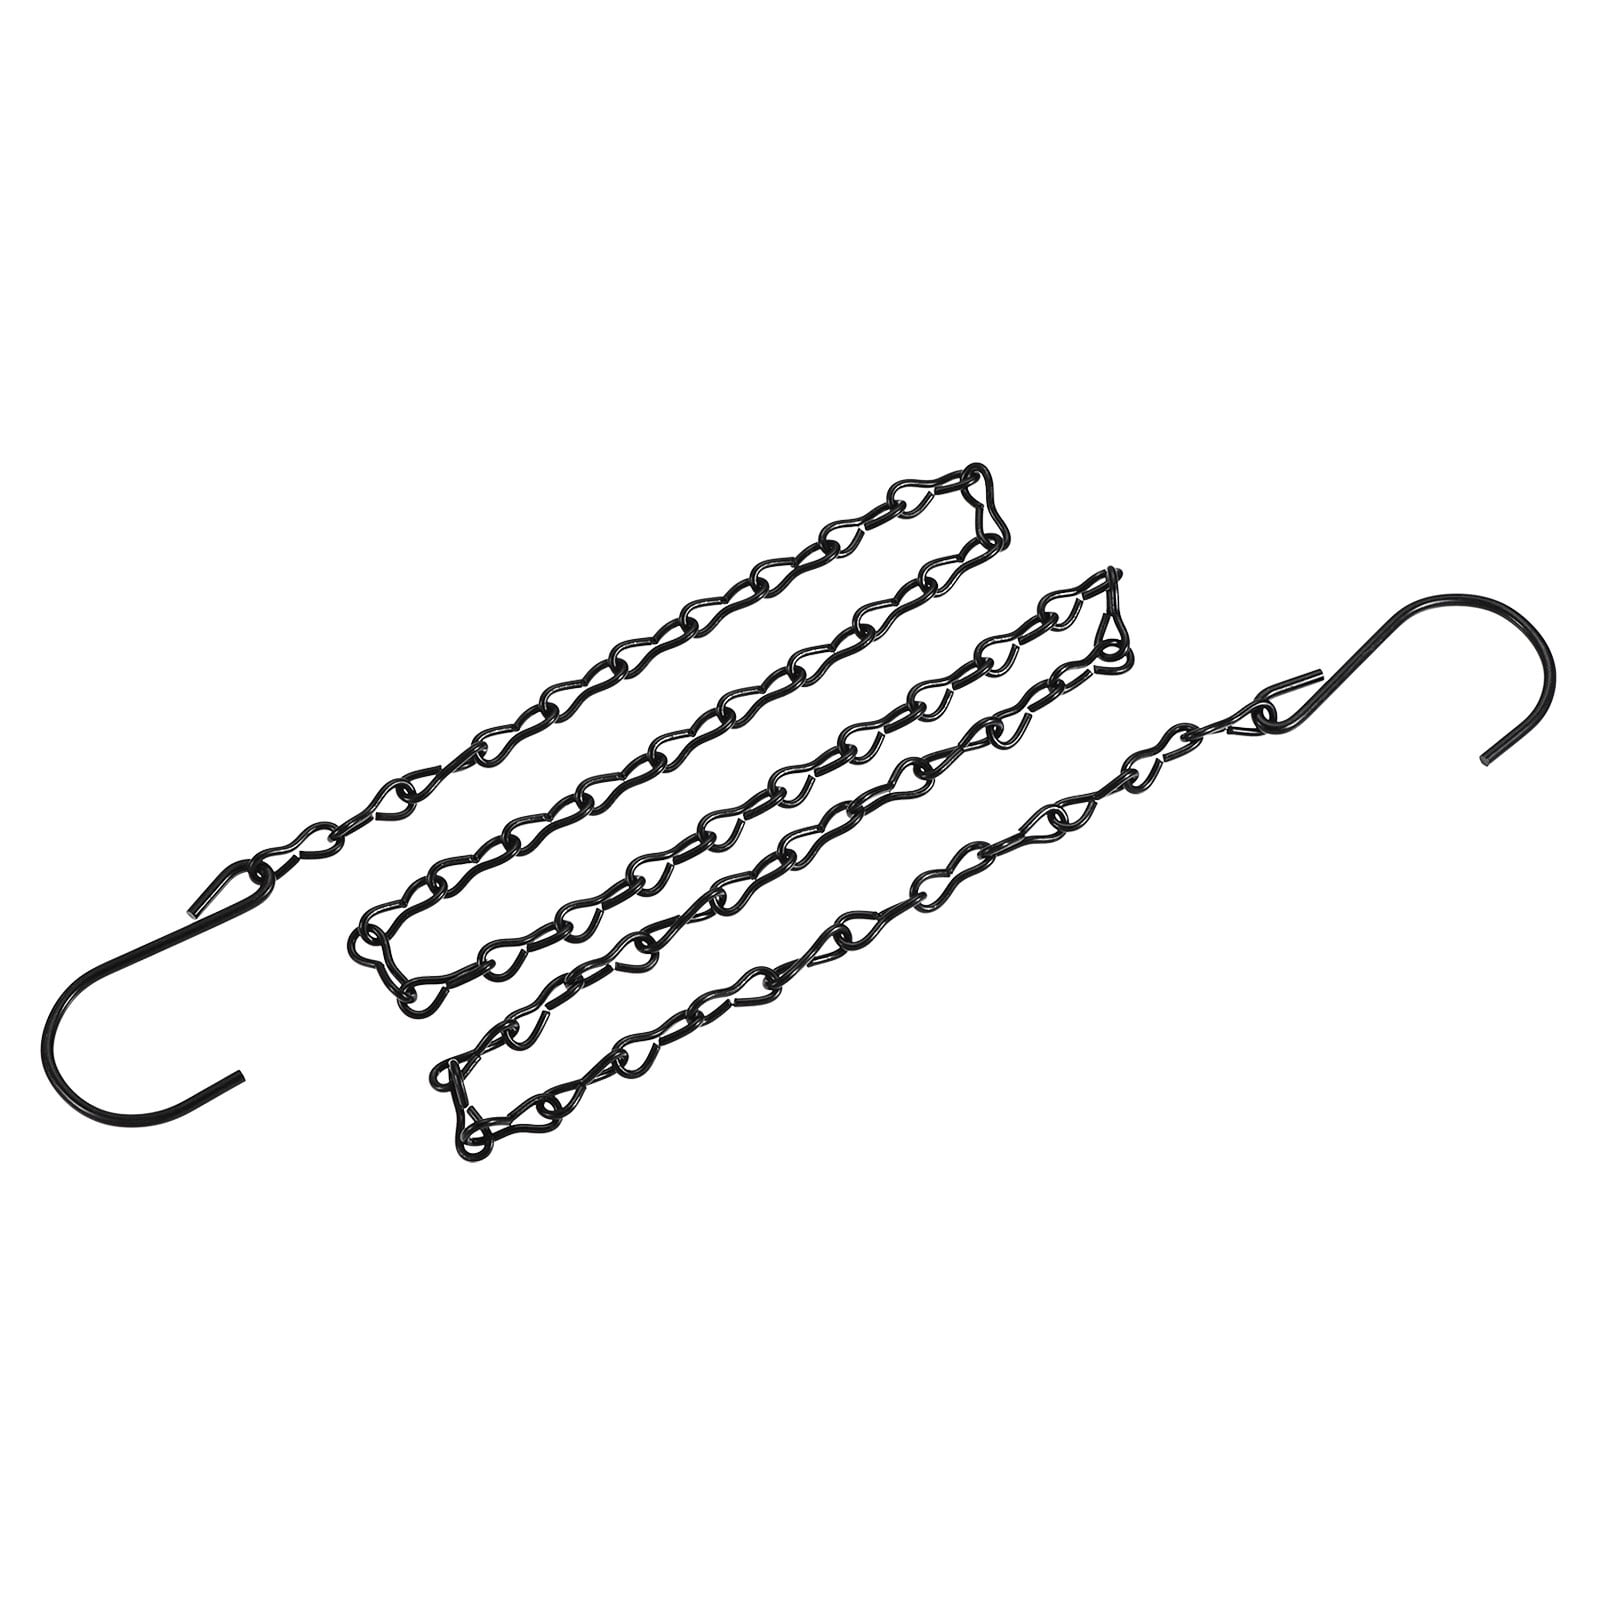 Uxcell 100cm Extension Link Adjustable Double S Shaped Hooks